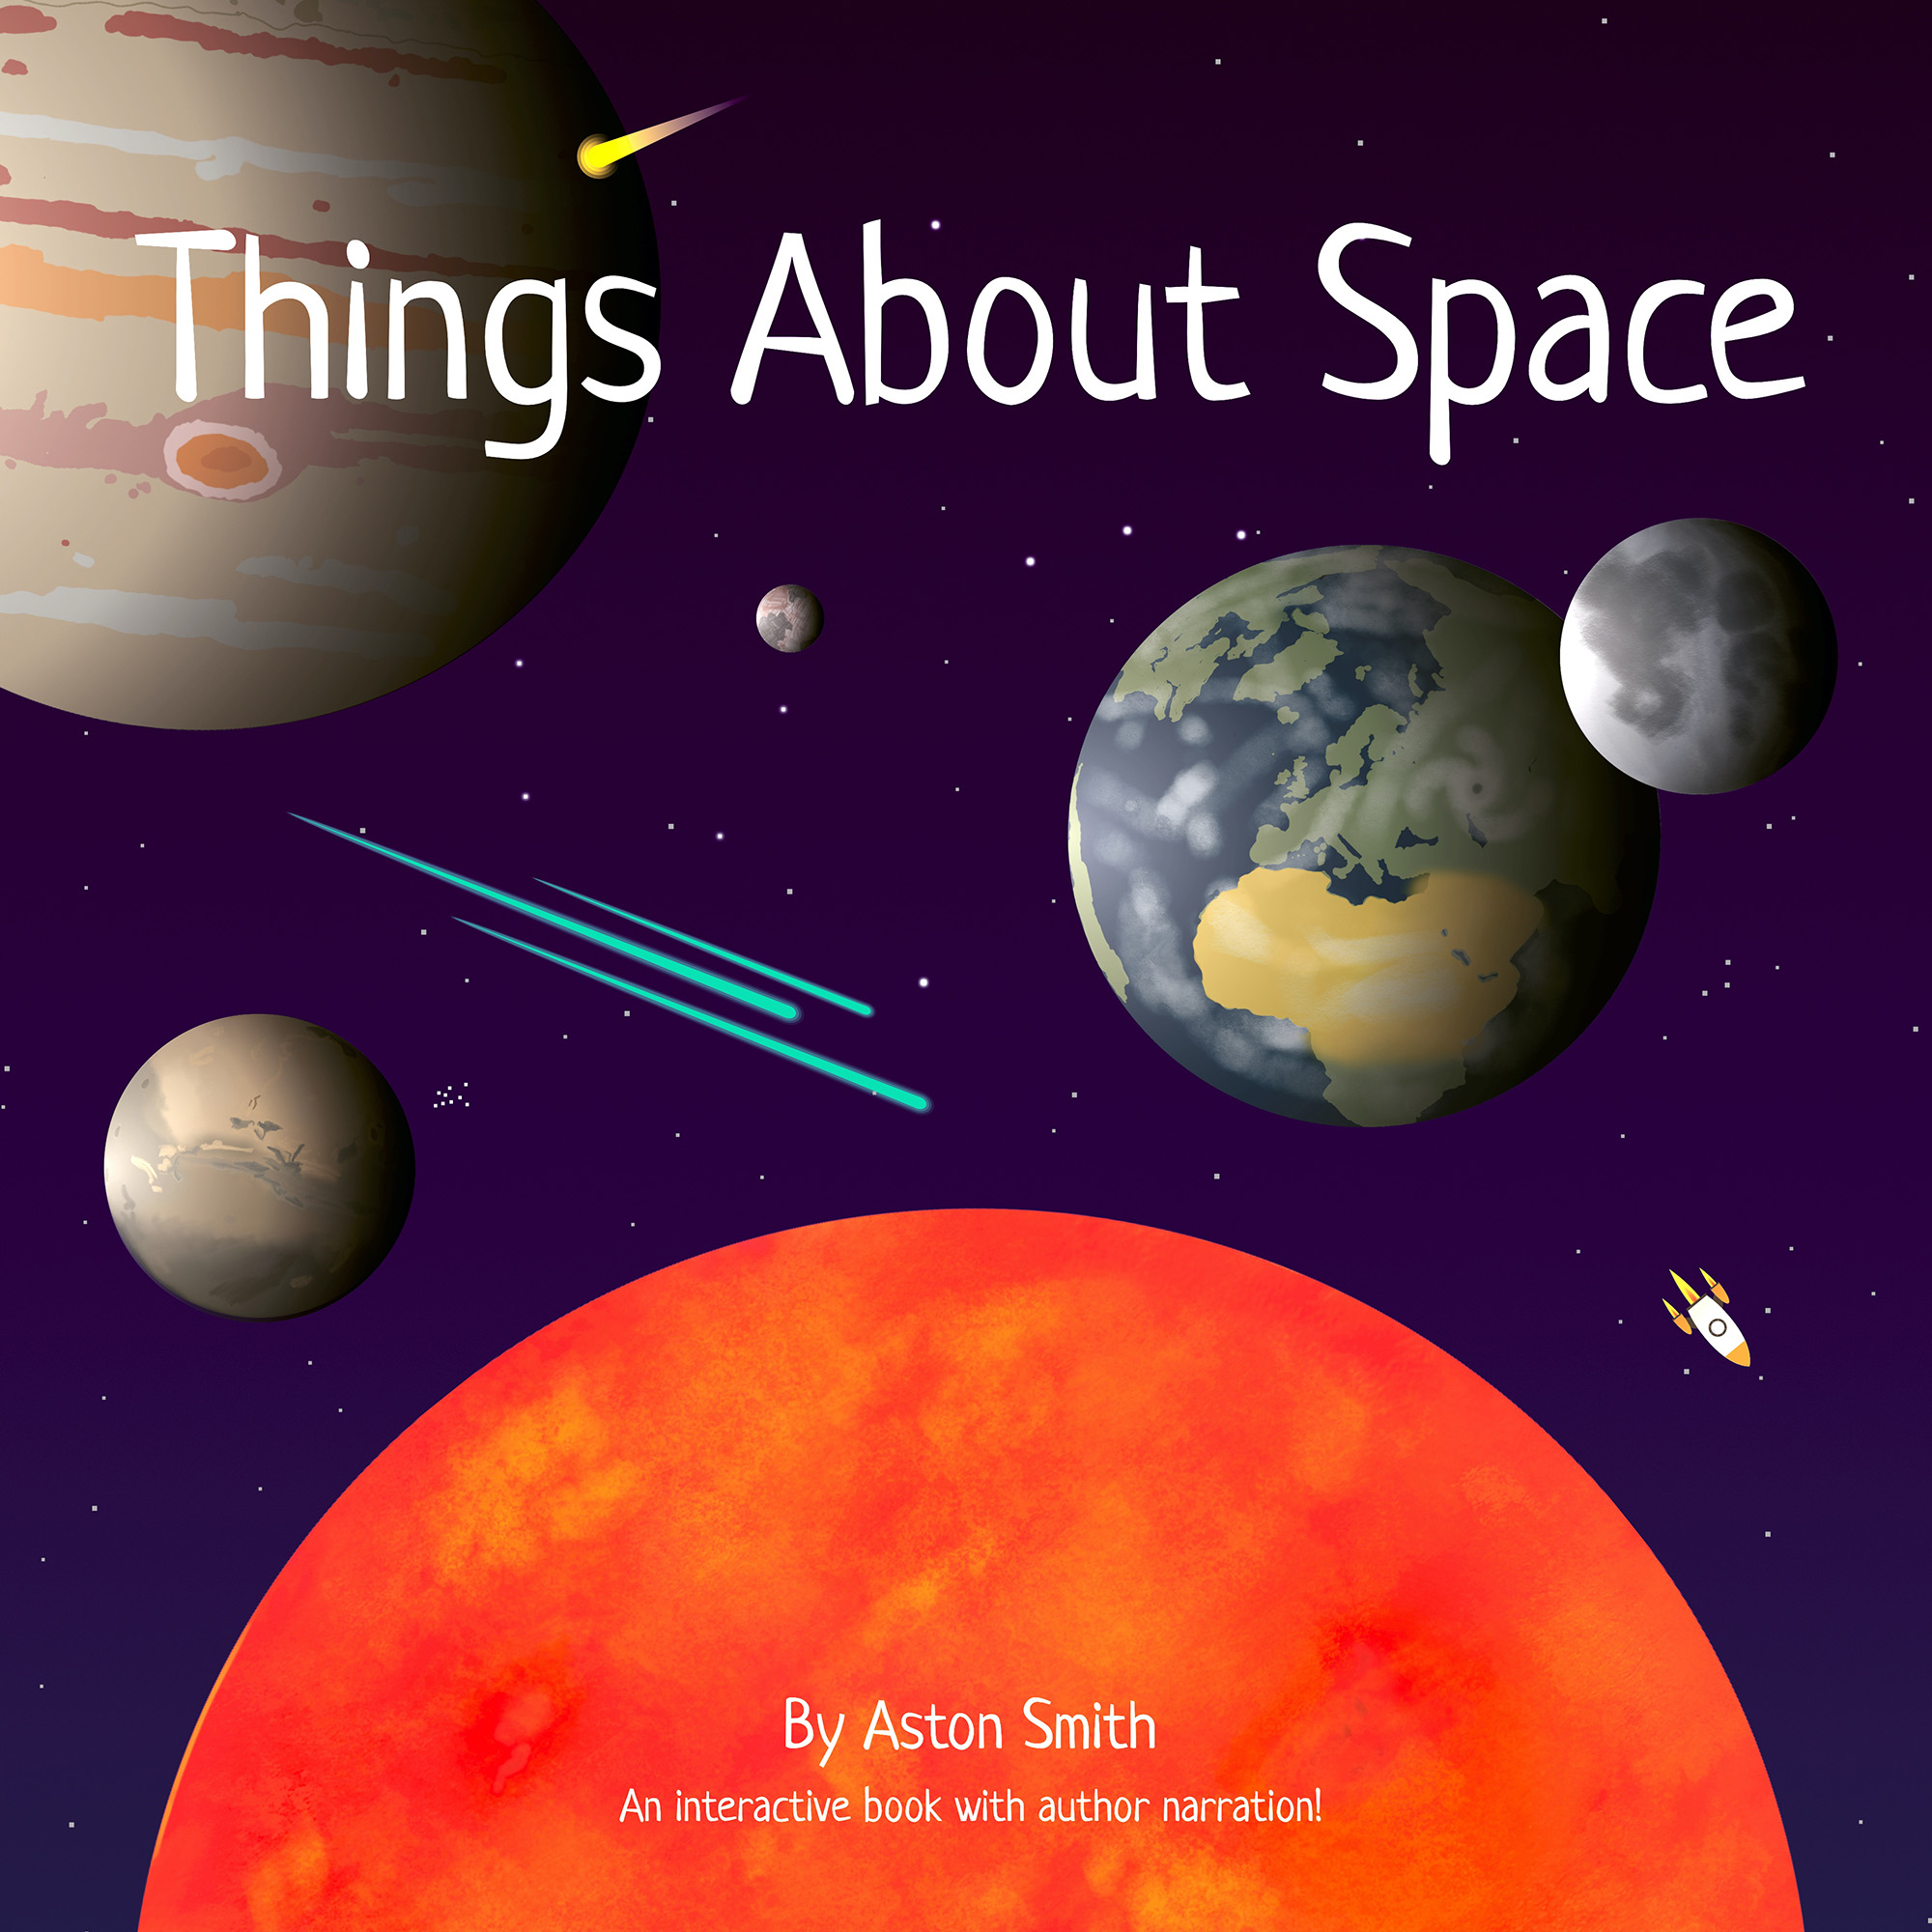 Things About Space by Aston Smith